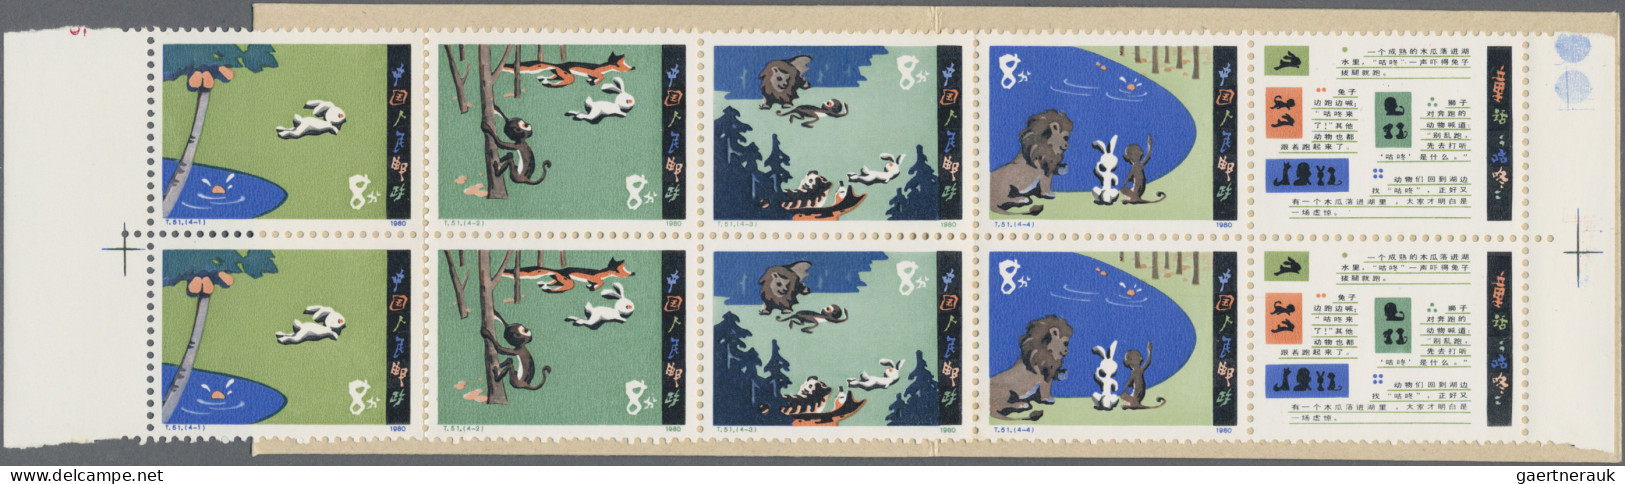 China (PRC): 1980, Gudong (T51) Booklet, Mint Never Hinged MNH (Michel €700) - Nuevos